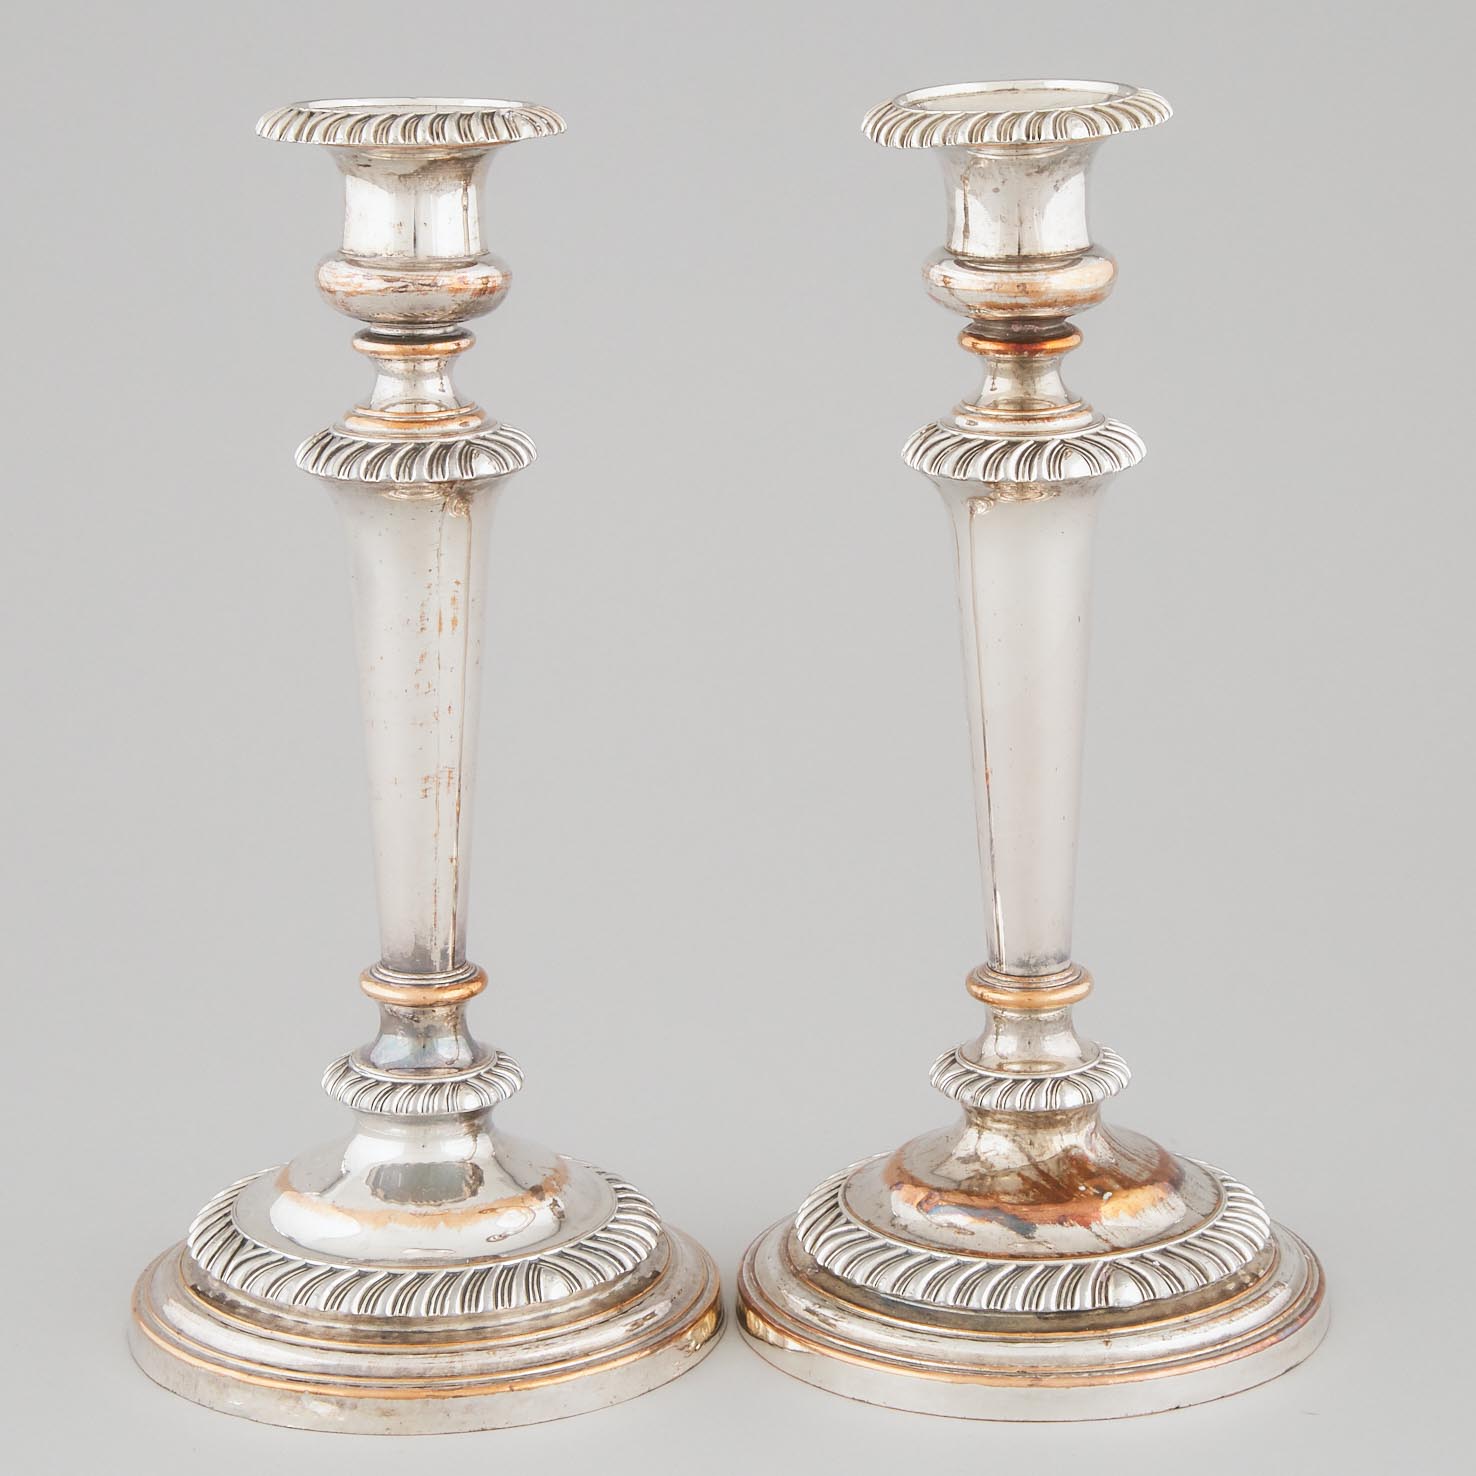 Pair of Old Sheffield Plate Table Candlesticks,